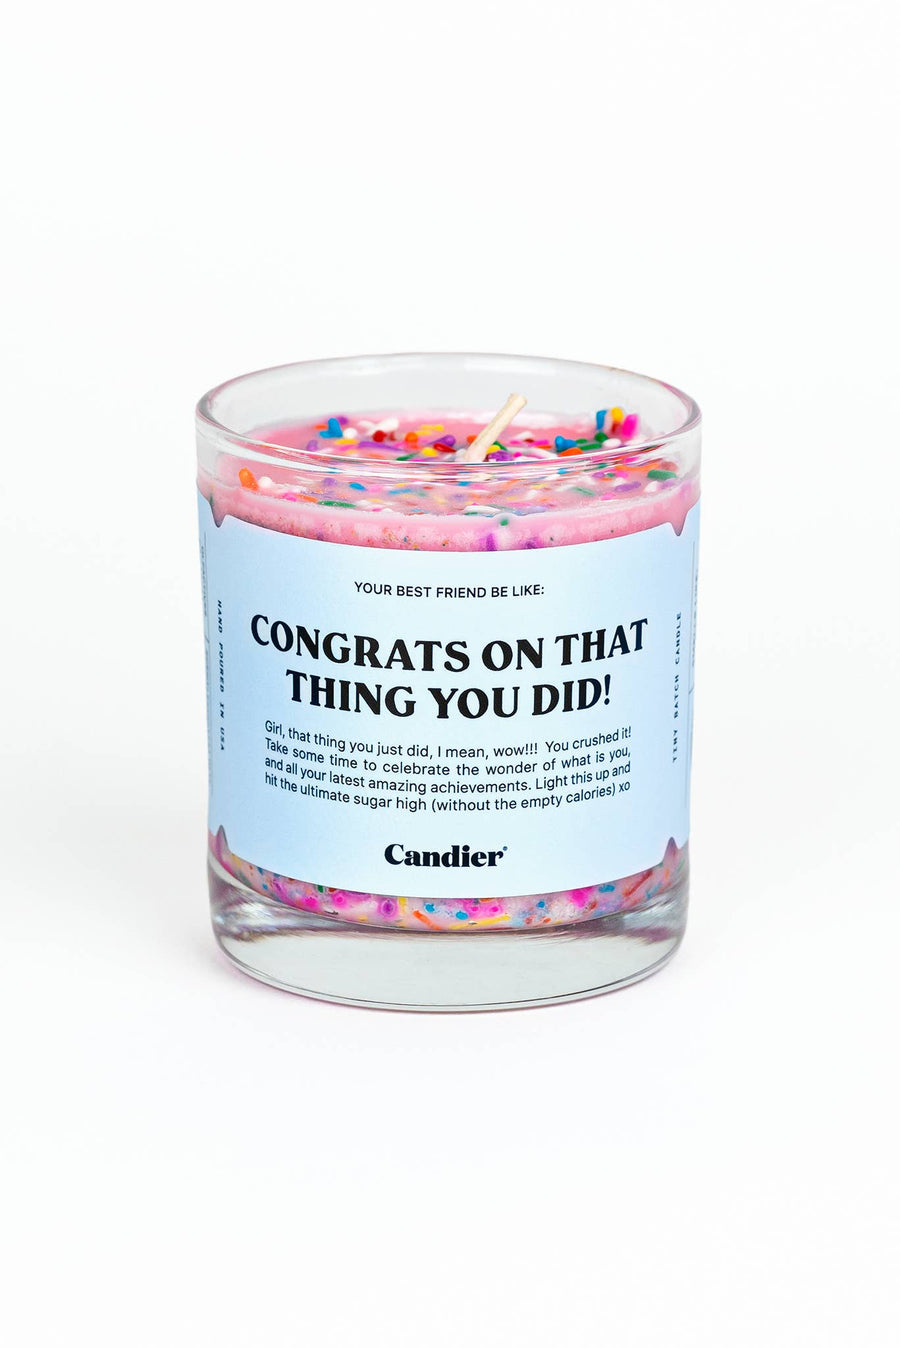 Candier | Congrats On That Thing You Did!